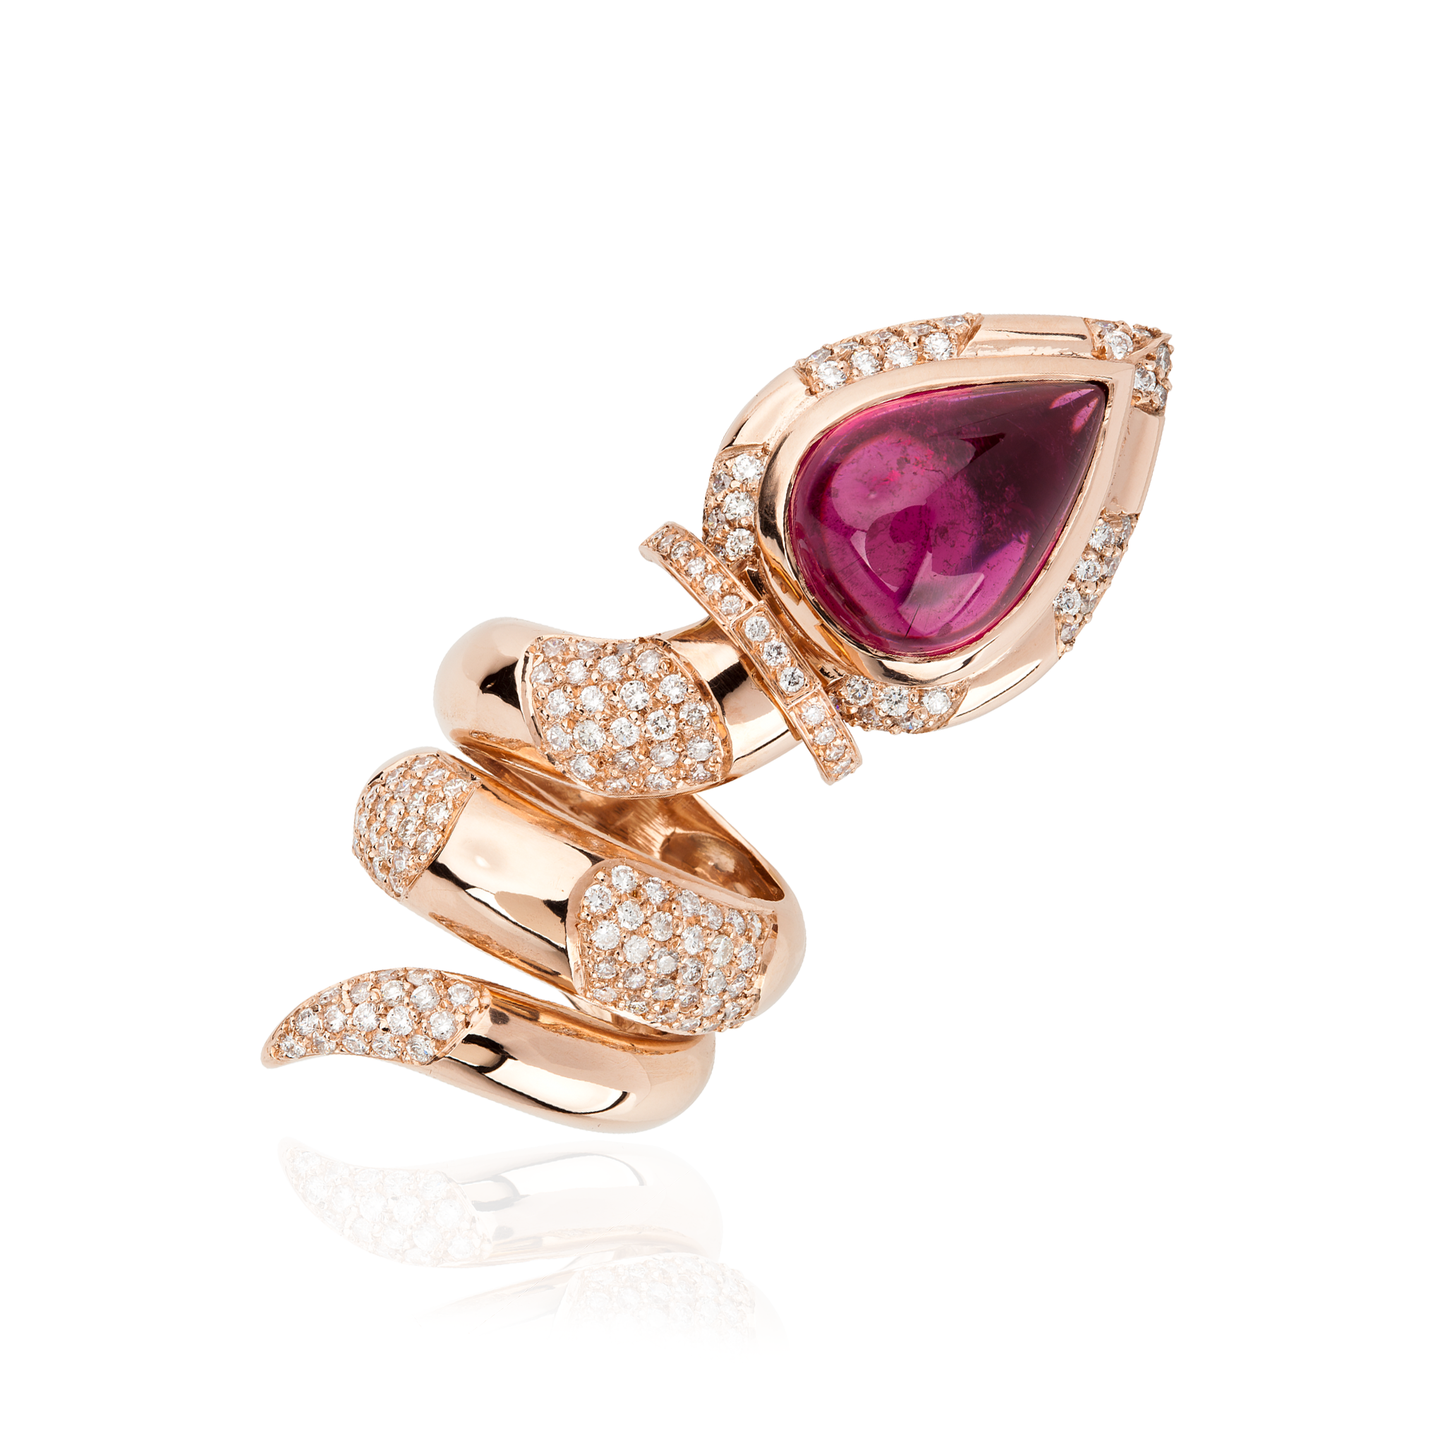 18K Rose Gold Snake Ring with Pear Shaped Tourmaline Cabochon